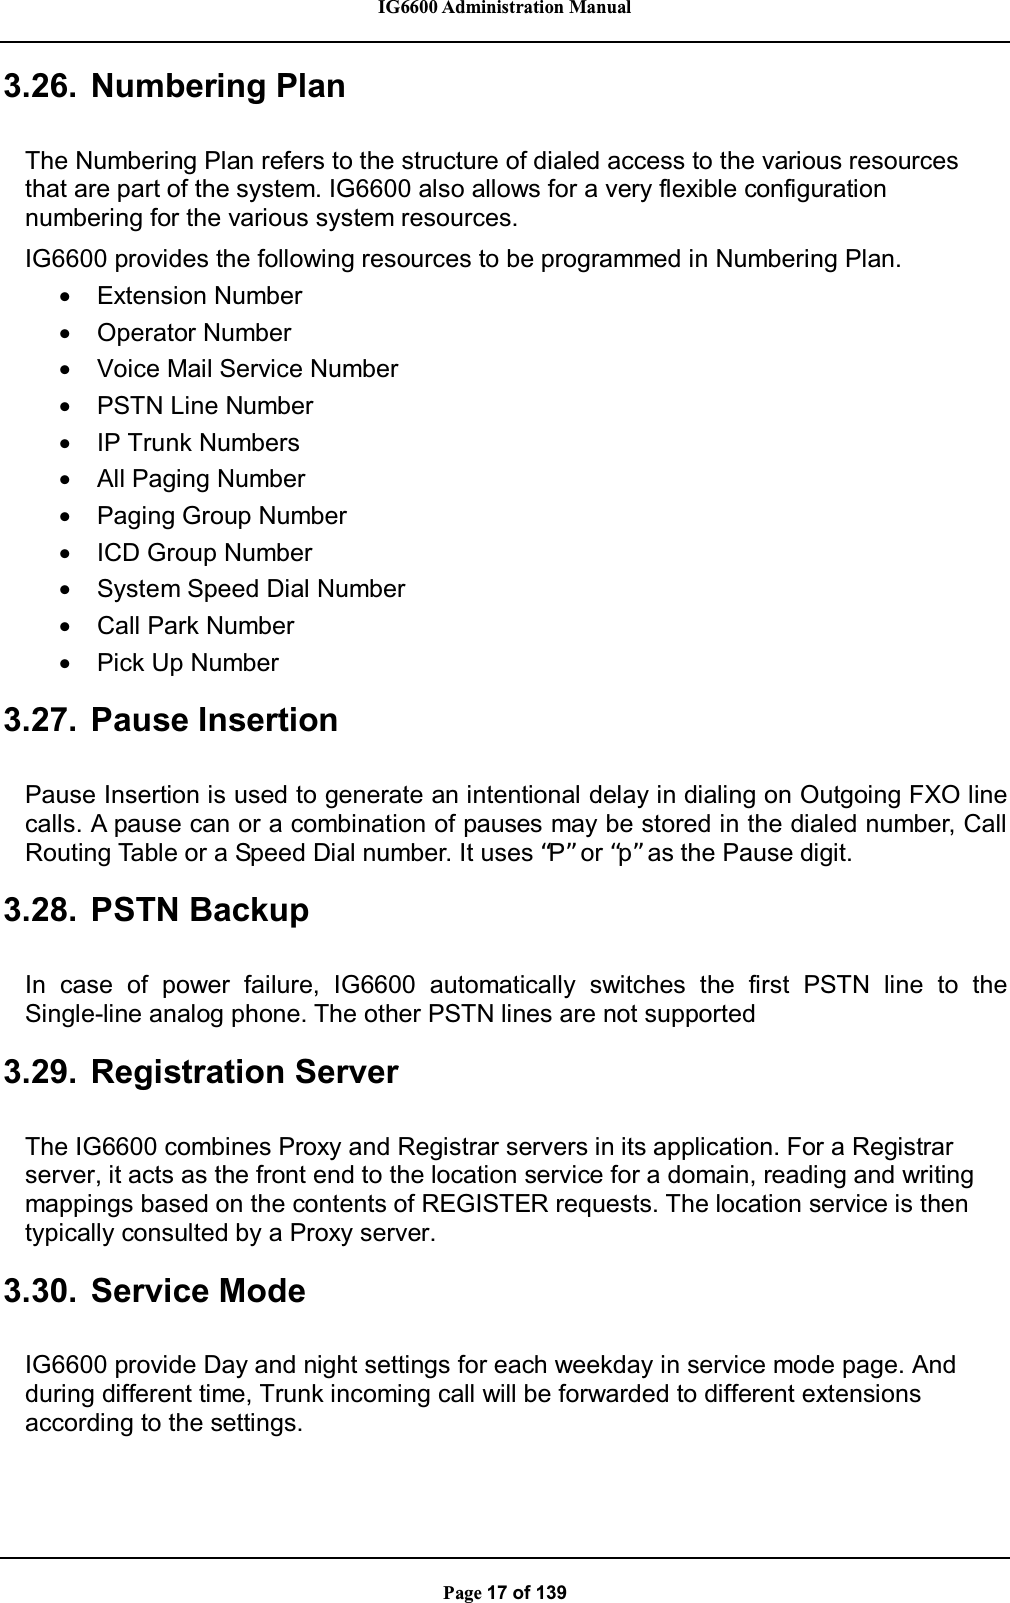 IG6600 Administration ManualPage 17 of 1393.26. Numbering PlanThe Numbering Plan refers to the structure of dialed access to the various resourcesthat are part of the system. IG6600 also allows for a very flexible configurationnumbering for the various system resources.IG6600 provides the following resources to be programmed in Numbering Plan.•Extension Number•Operator Number•Voice Mail Service Number•PSTN Line Number•IP Trunk Numbers•All Paging Number•Paging Group Number•ICD Group Number•System Speed Dial Number•Call Park Number•Pick Up Number3.27. Pause InsertionPause Insertion is used to generate an intentional delay in dialing on Outgoing FXO linecalls. A pause can or a combination of pauses may be stored in the dialed number, CallRouting Table or a Speed Dial number. It uses “P”or “p”as the Pause digit.3.28. PSTN BackupIn case of power failure, IG6600 automatically switches the first PSTN line to theSingle-line analog phone. The other PSTN lines are not supported3.29. Registration ServerThe IG6600 combines Proxy and Registrar servers in its application. For a Registrarserver, it acts as the front end to the location service for a domain, reading and writingmappings based on the contents of REGISTER requests. The location service is thentypically consulted by a Proxy server.3.30. Service ModeIG6600 provide Day and night settings for each weekday in service mode page. Andduring different time, Trunk incoming call will be forwarded to different extensionsaccording to the settings.